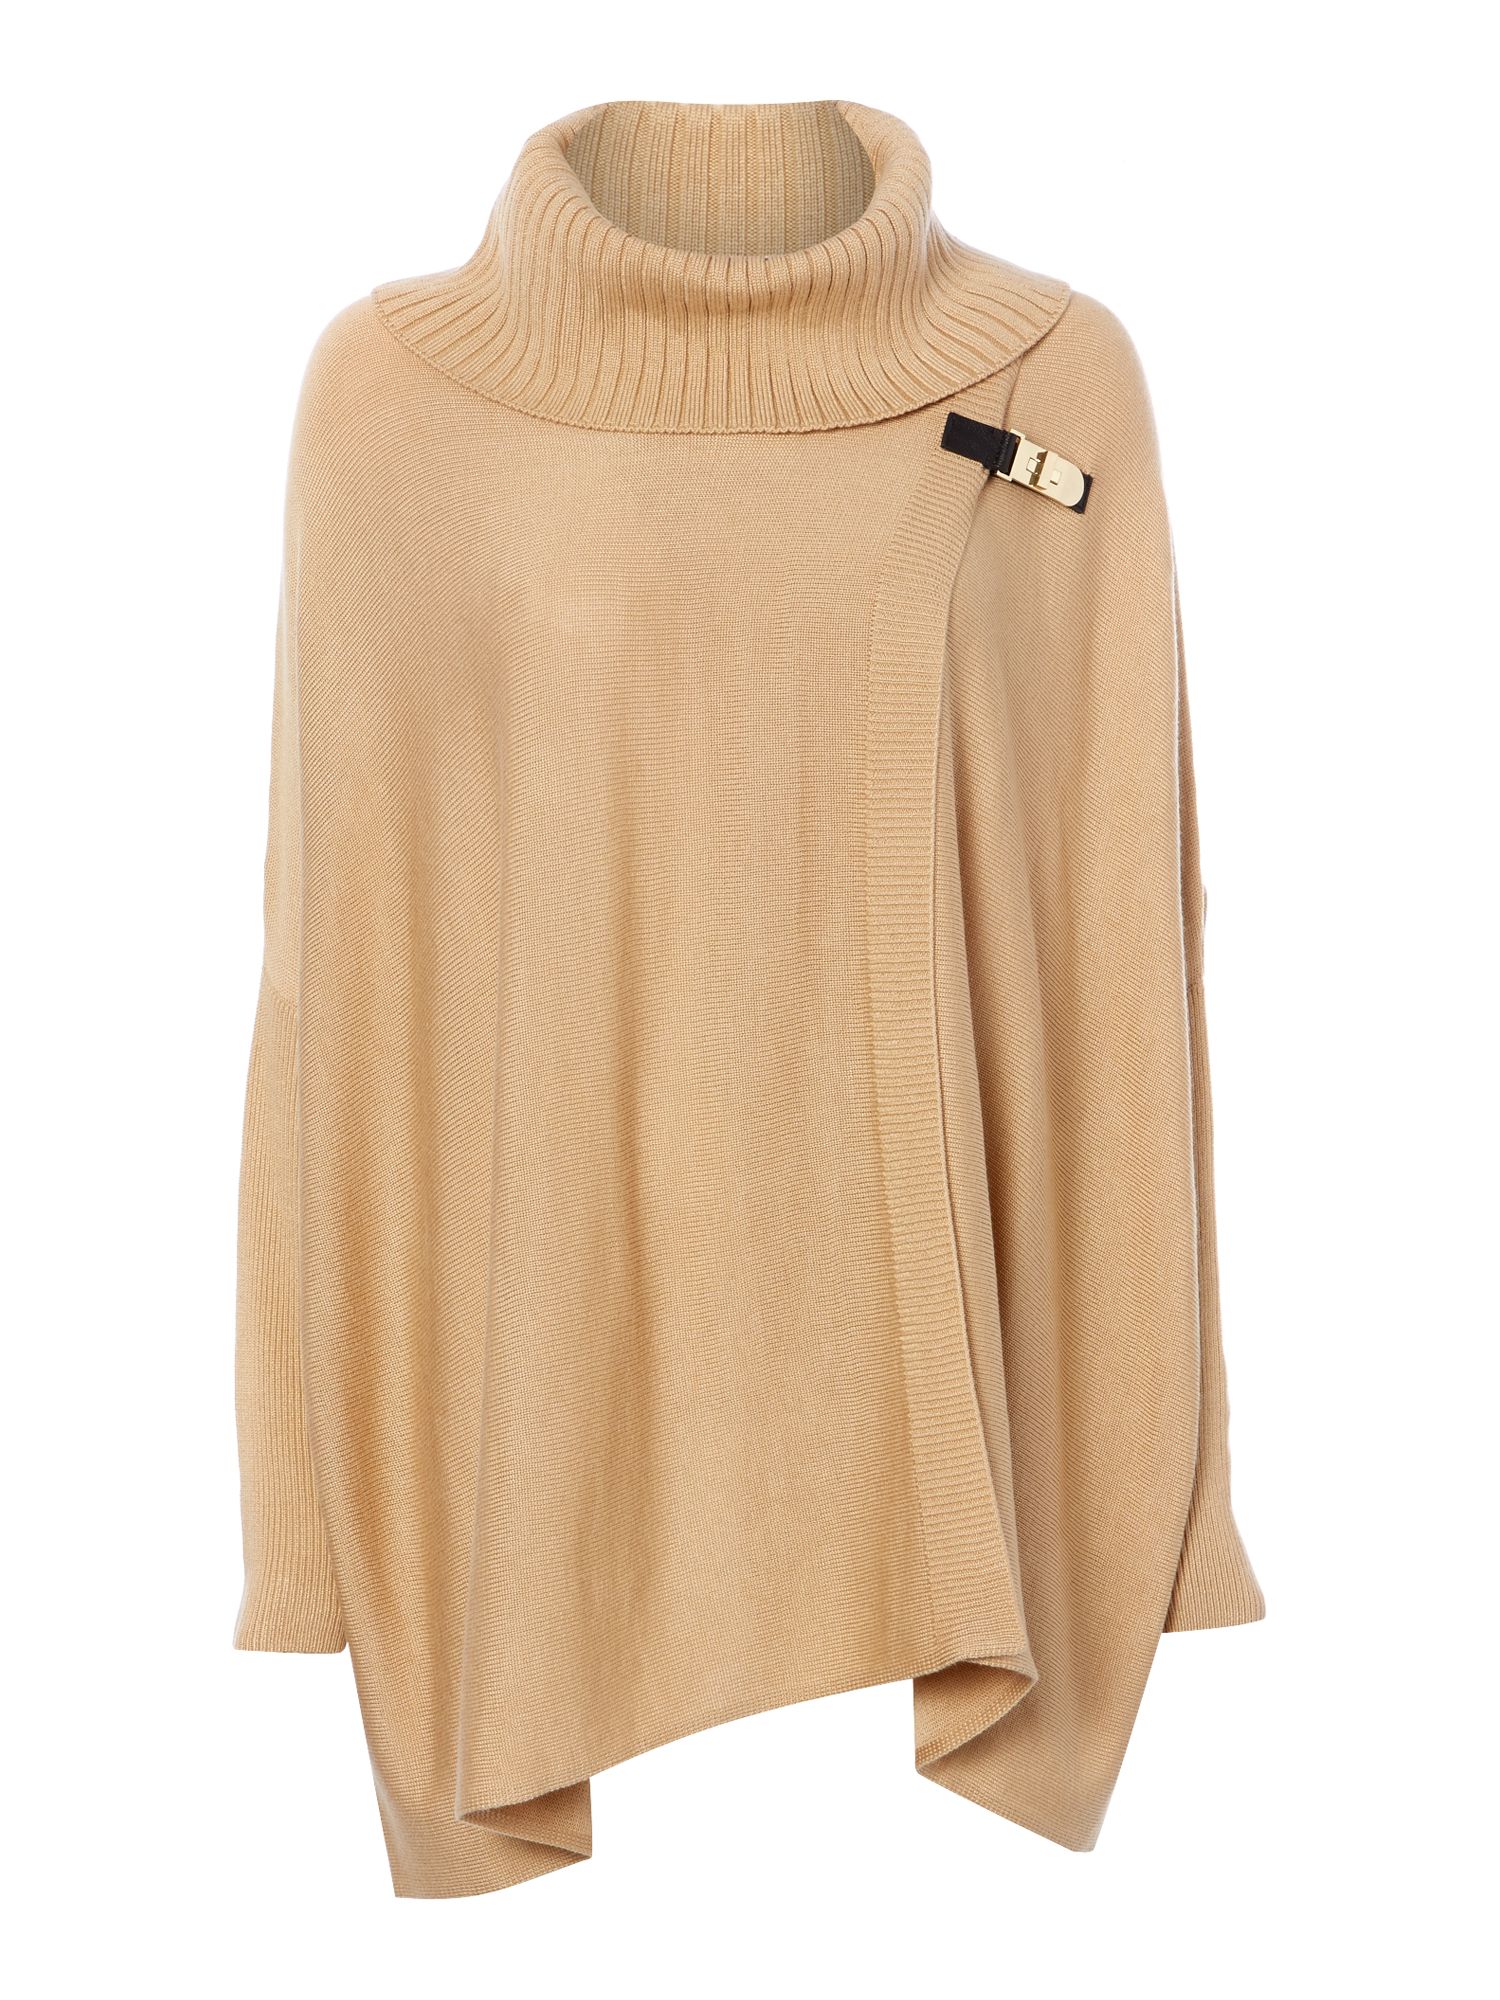 Episode Roll Neck Knitted Cape with Buckle Detail in Beige (Camel) | Lyst